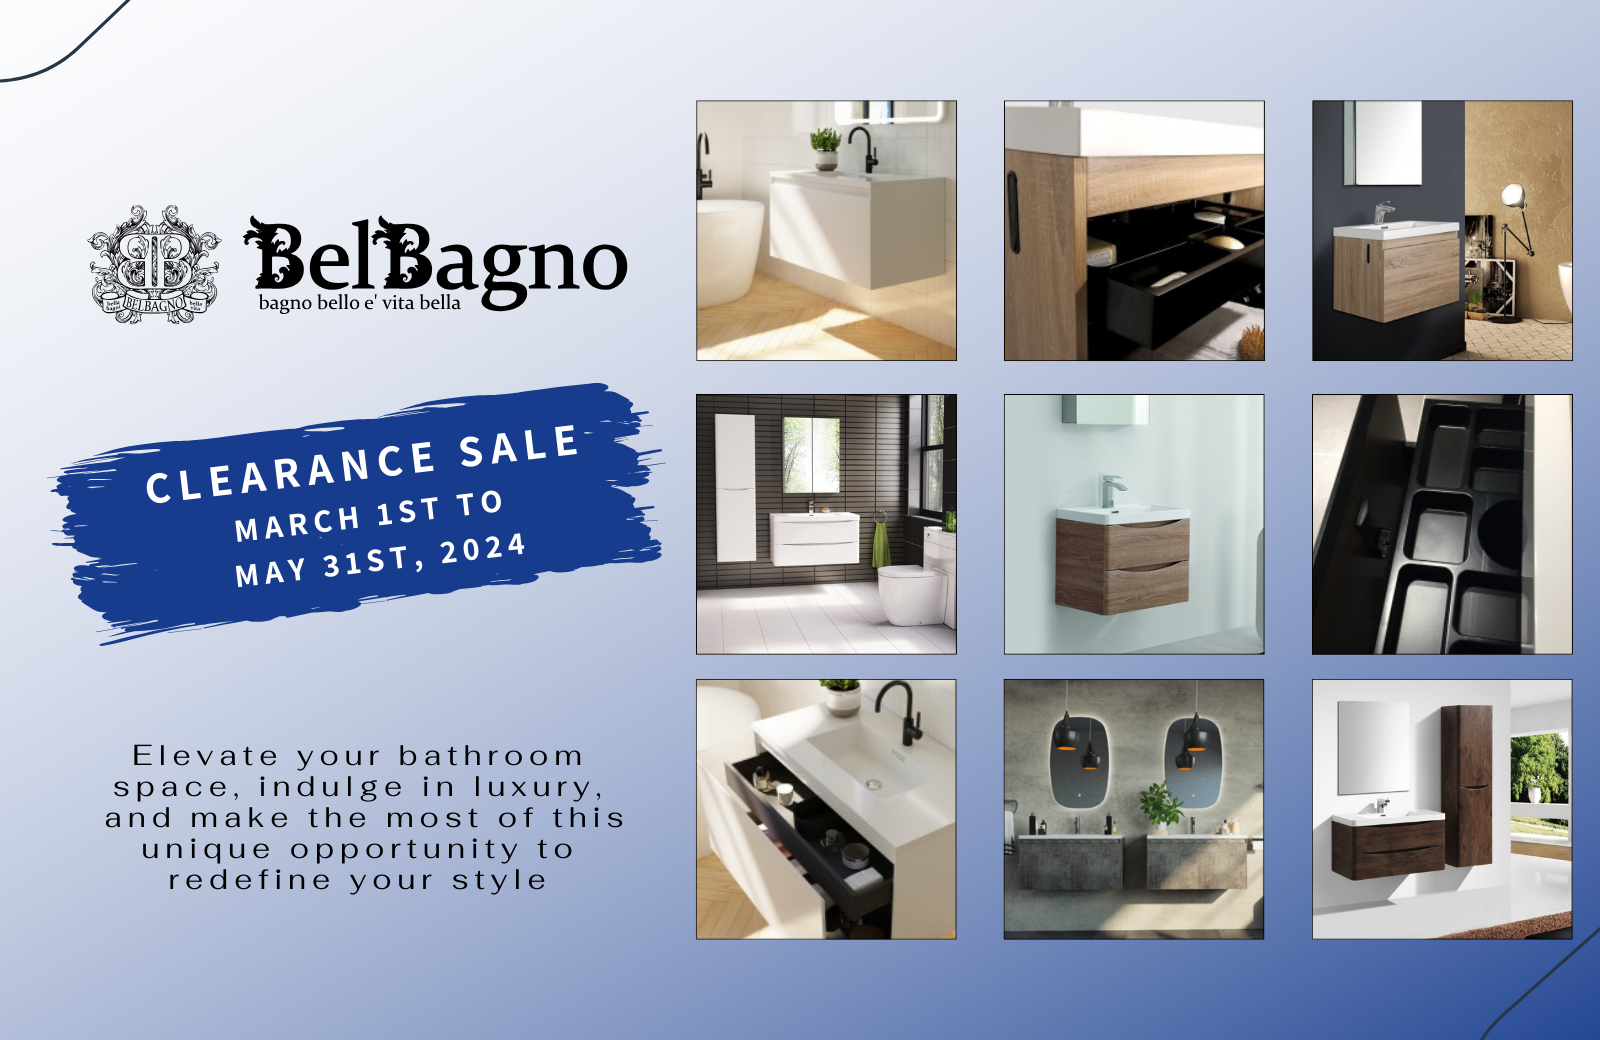 Revitalize Your Bathroom with Belbagno's Clearance Sale: March 1st to May 31st, 2024